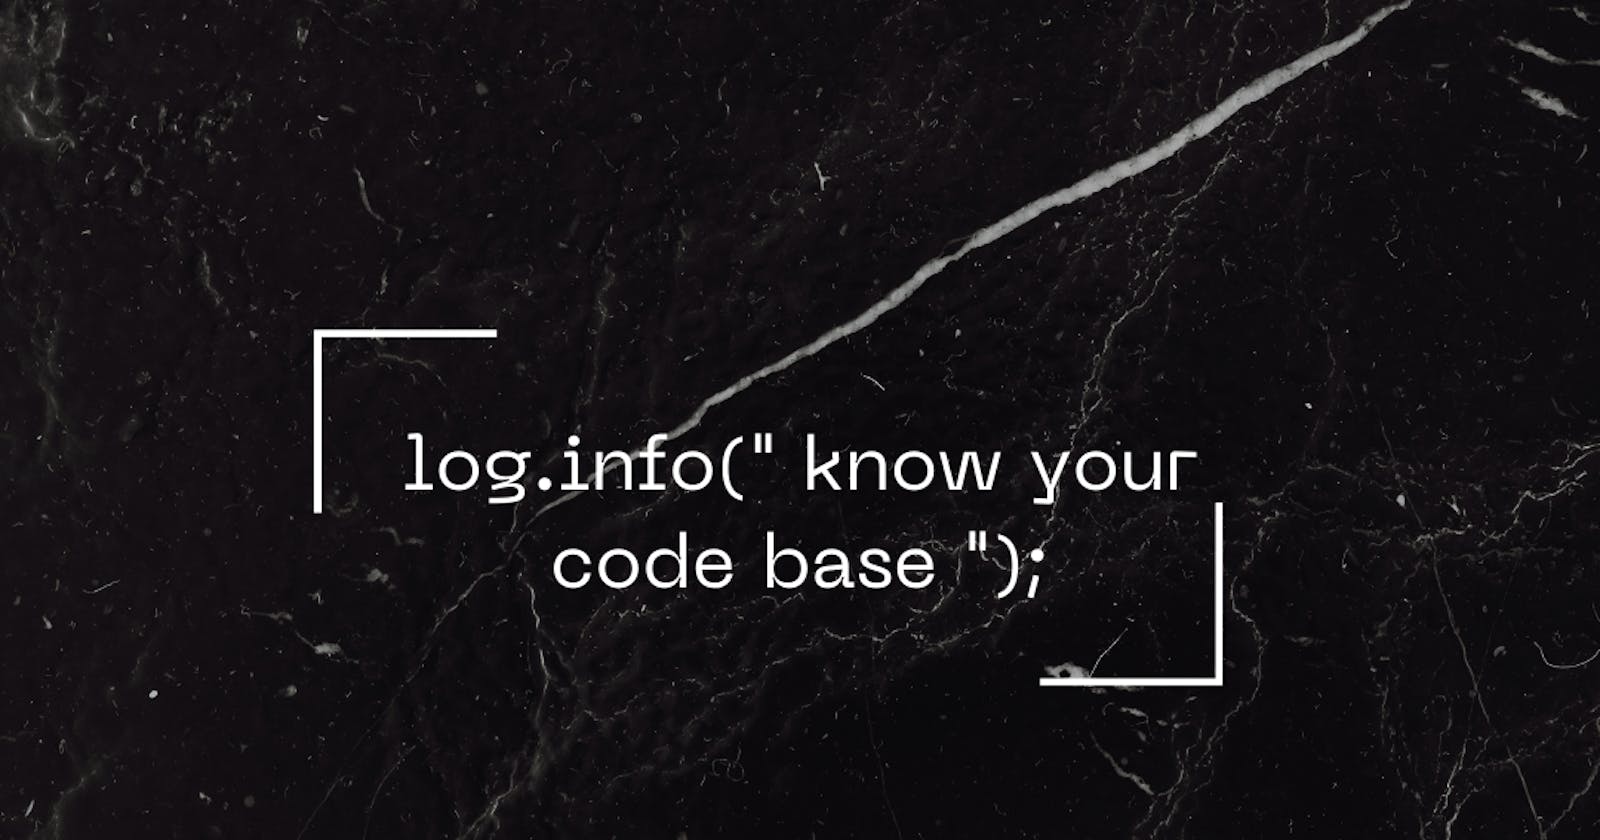 Let's Know Our Code!